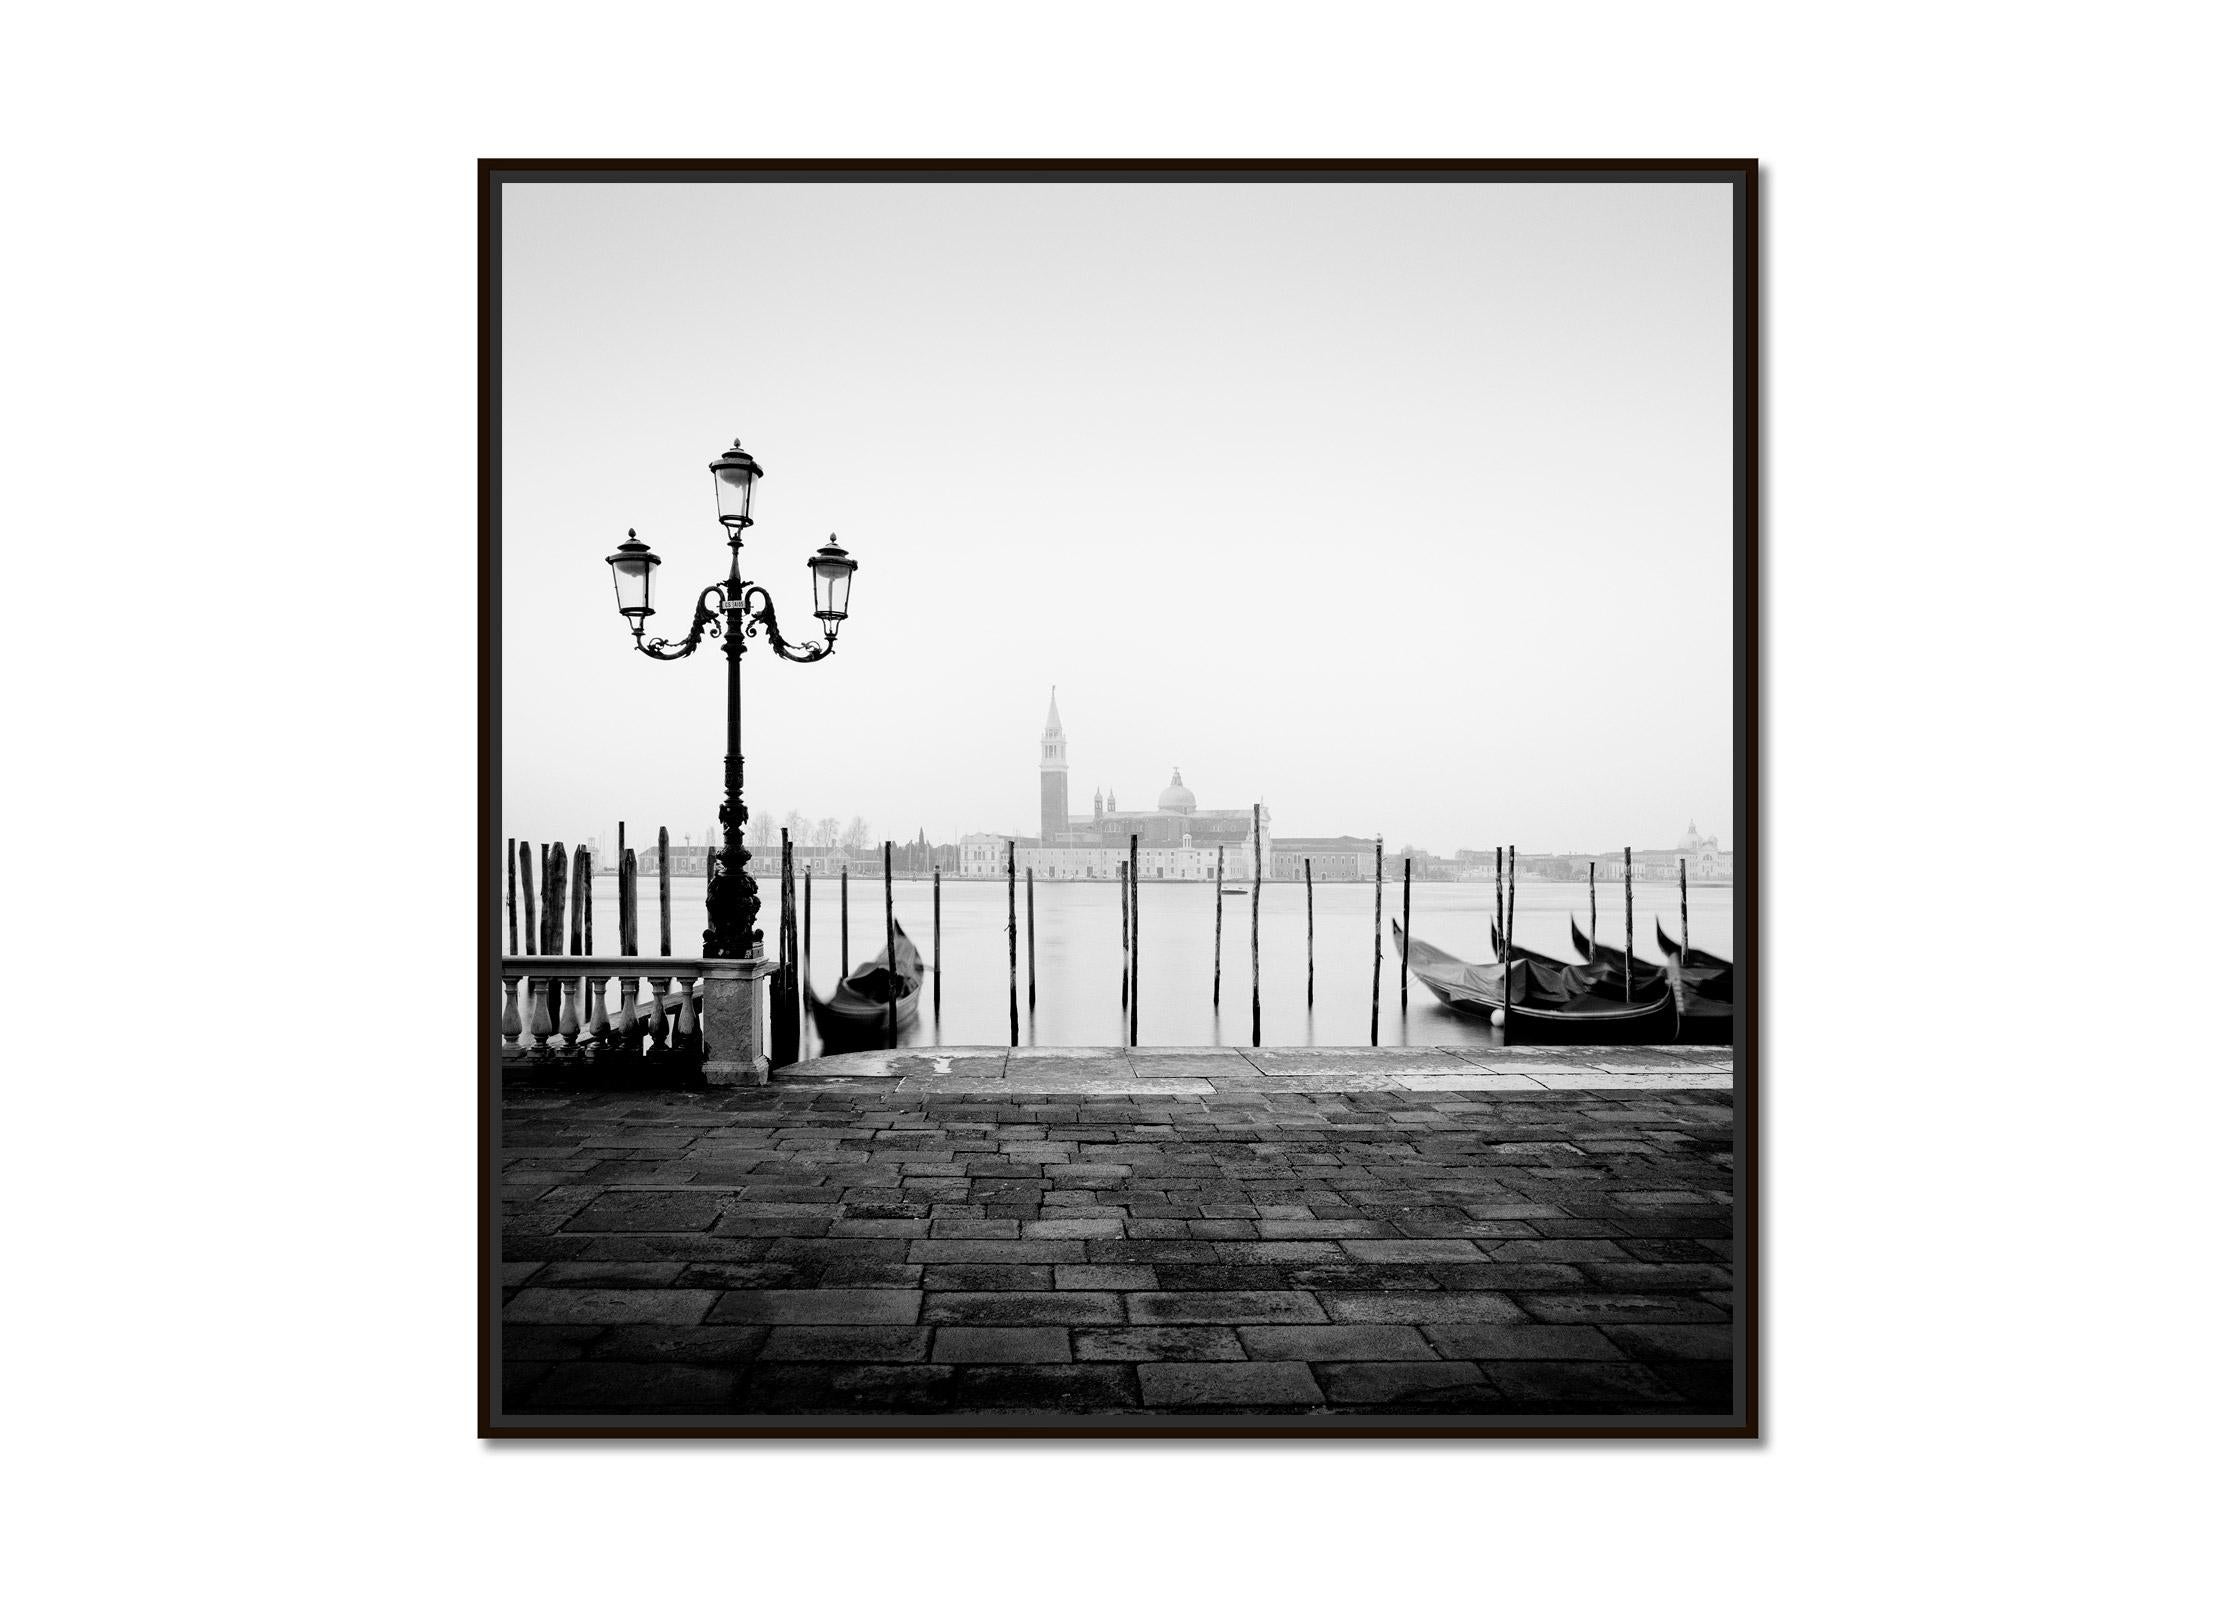 More Free Space Basilica Venice Italy black white fine art landscape photography - Photograph by Gerald Berghammer